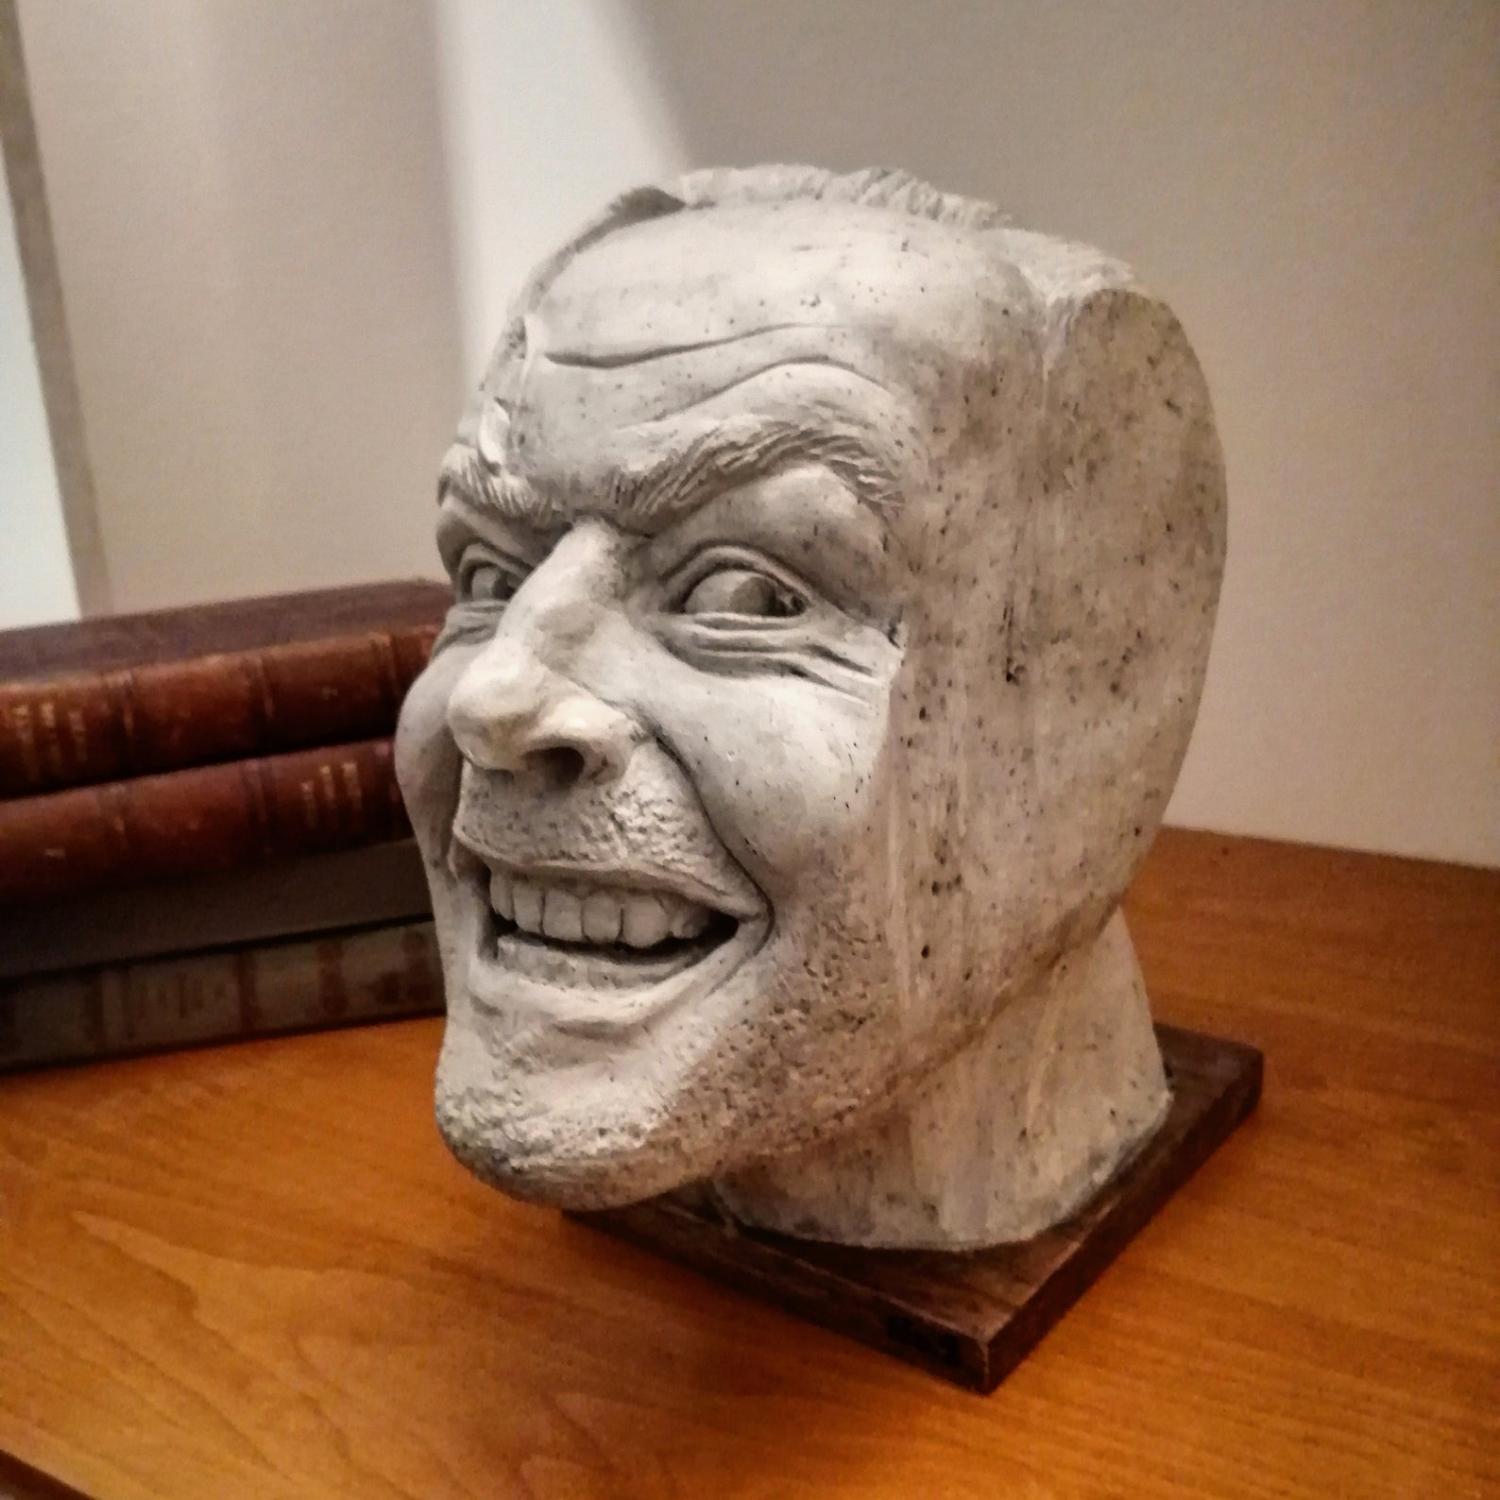 White ceramic 'The Shining' Bookend on a brown wooden floor